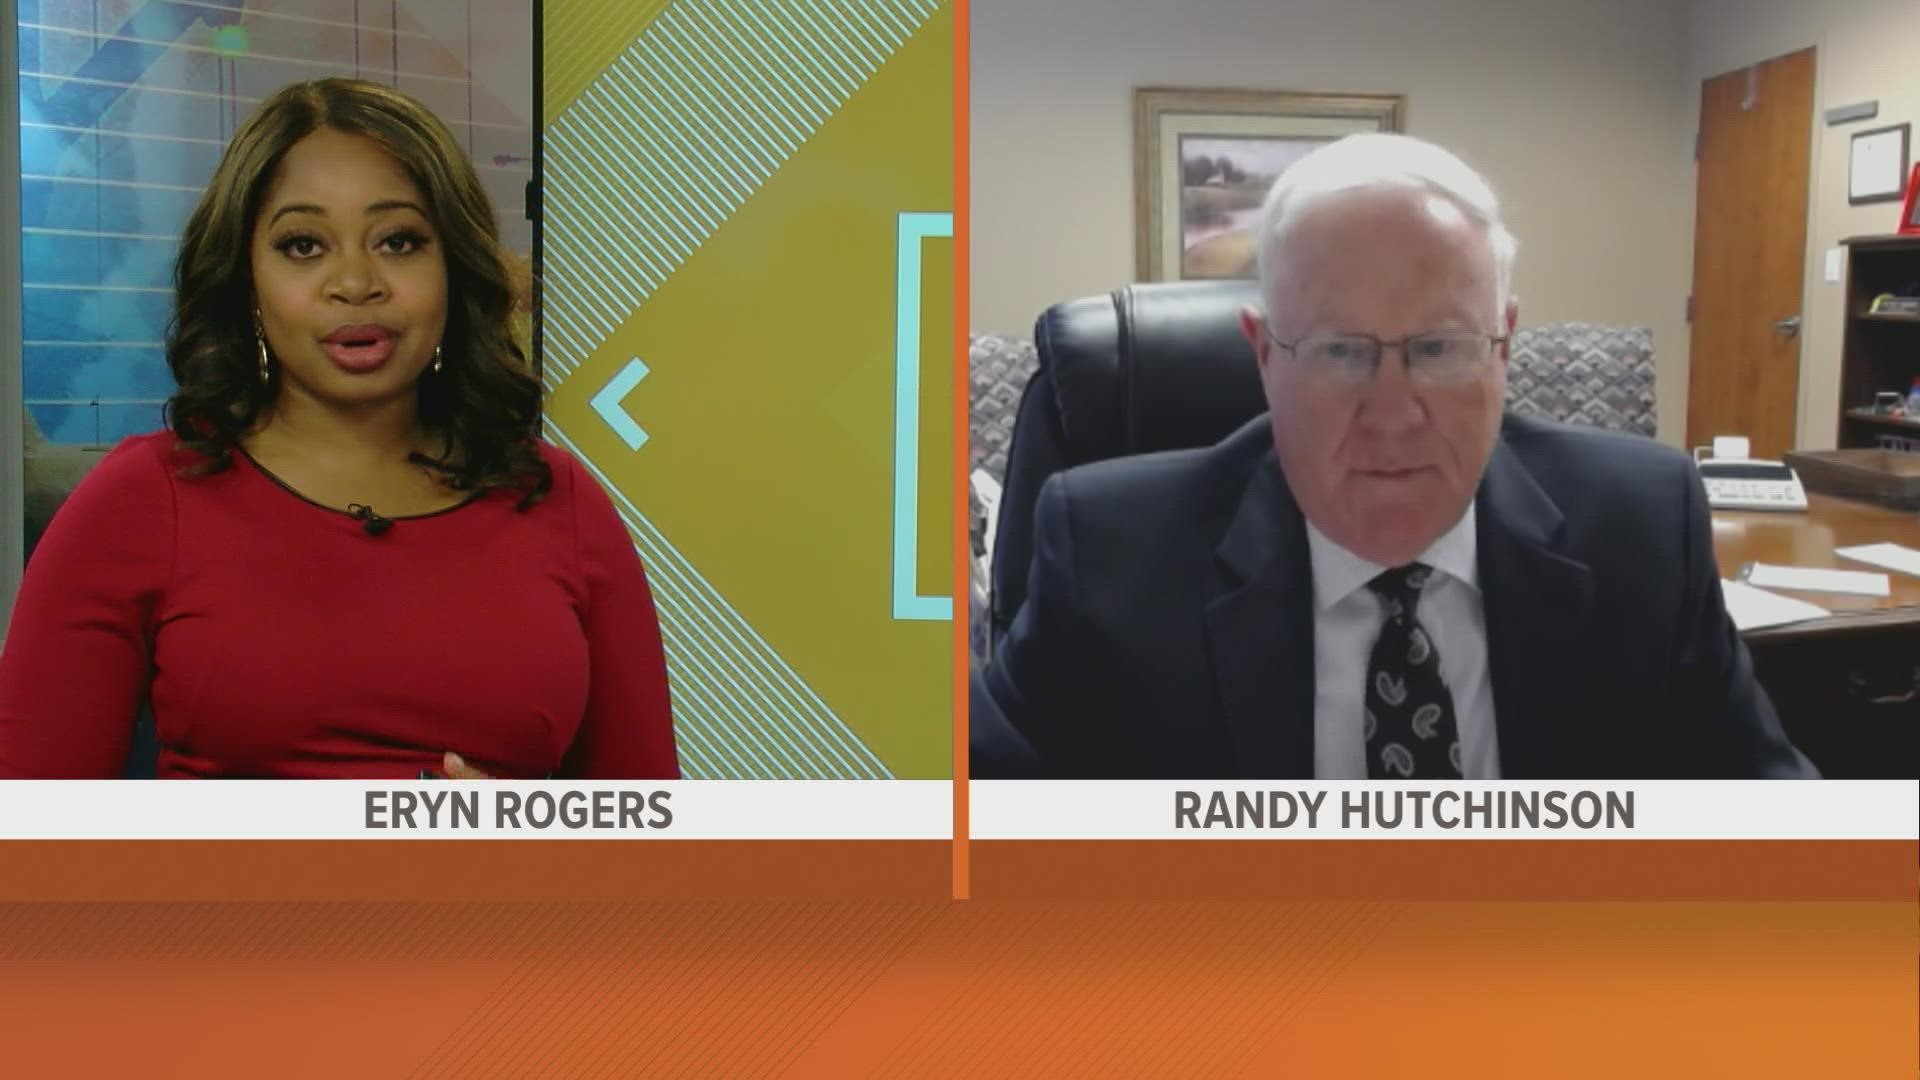 Randy Hutchinson from the Better Business Bureau of the Mid-South spoke with ABC 24 about what everyone should know about these types of loans.